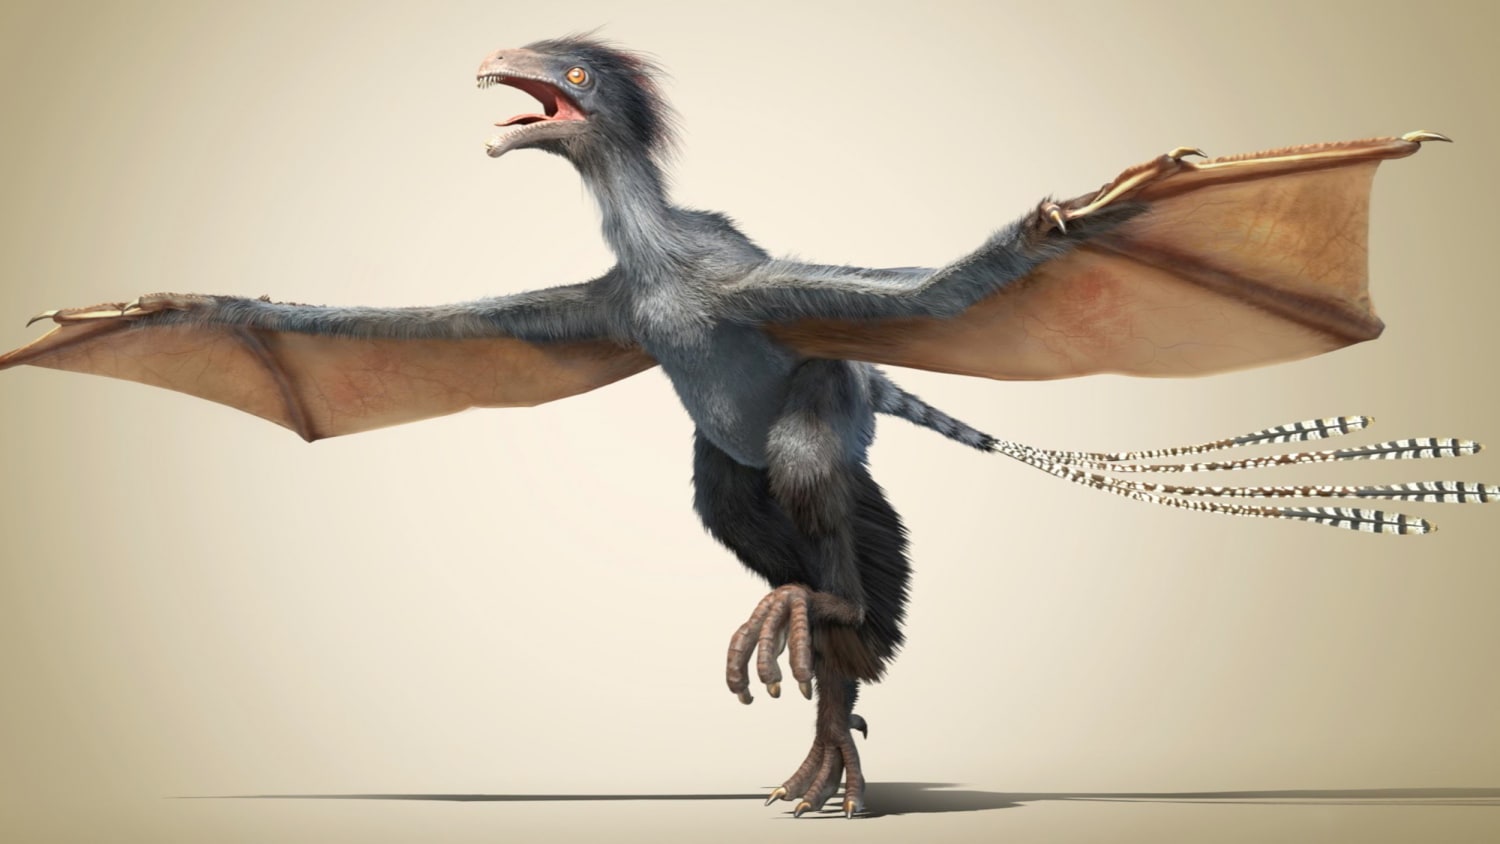 A Pigeon-Size Dinosaur with Bat Wings? Strange But True